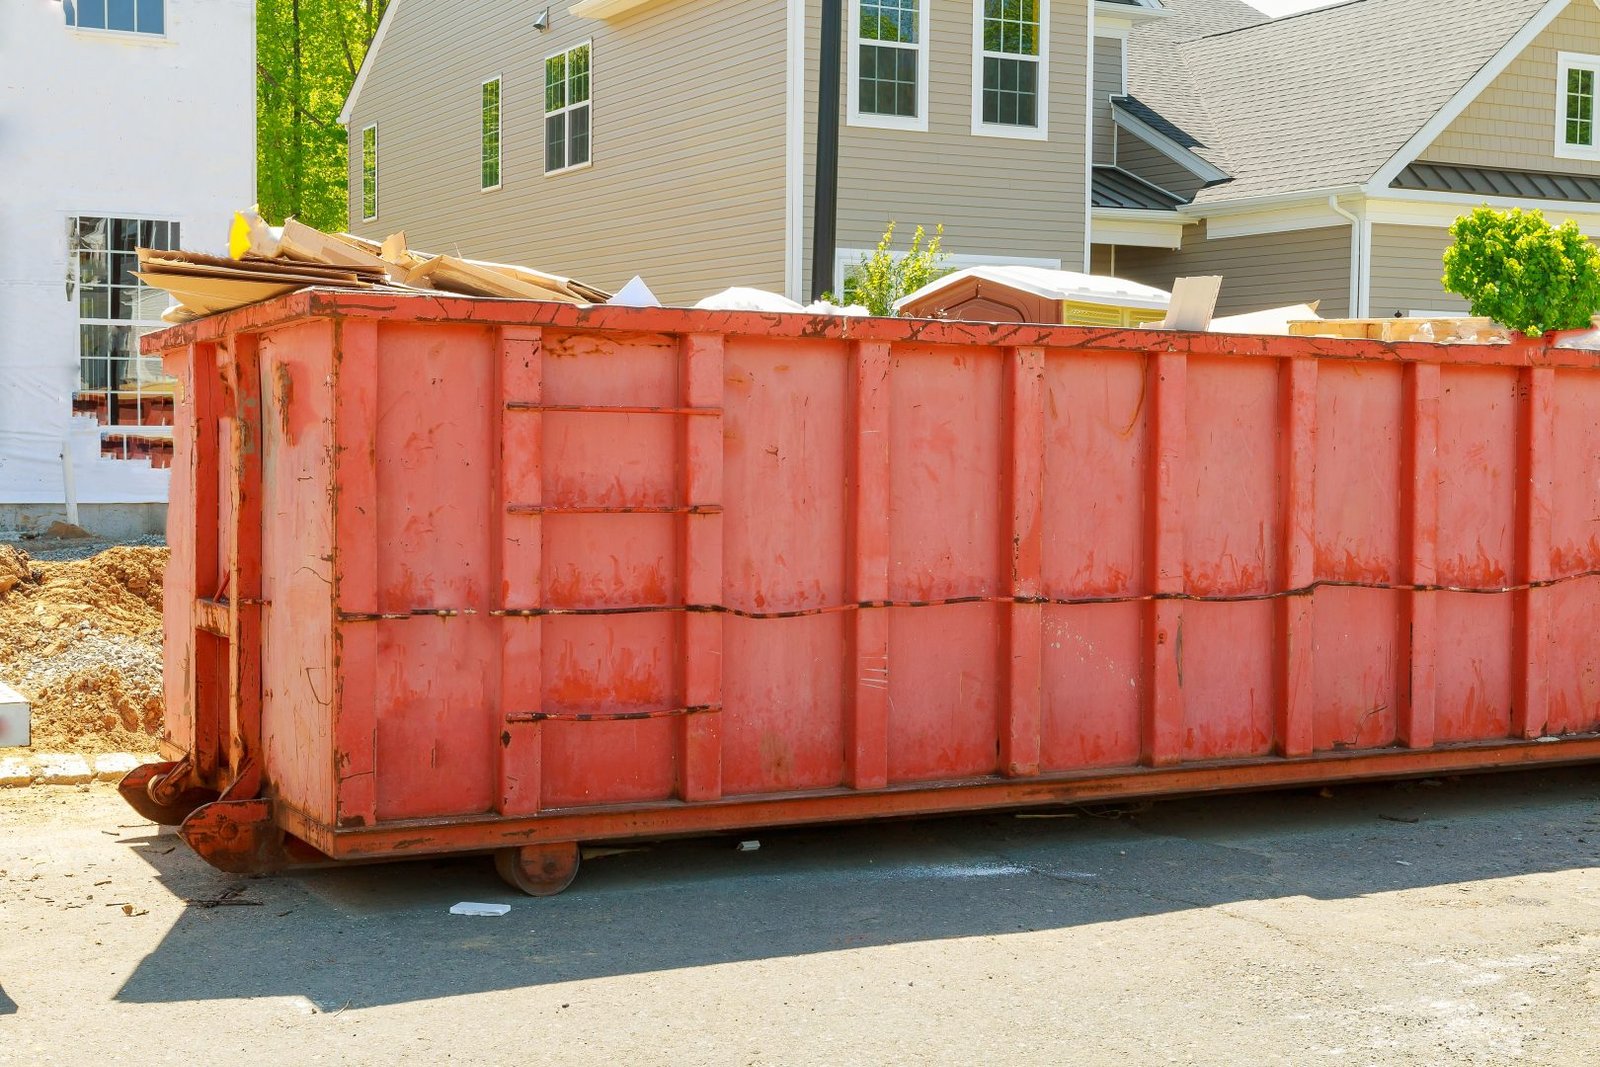 Introduction to Dumpster Rental